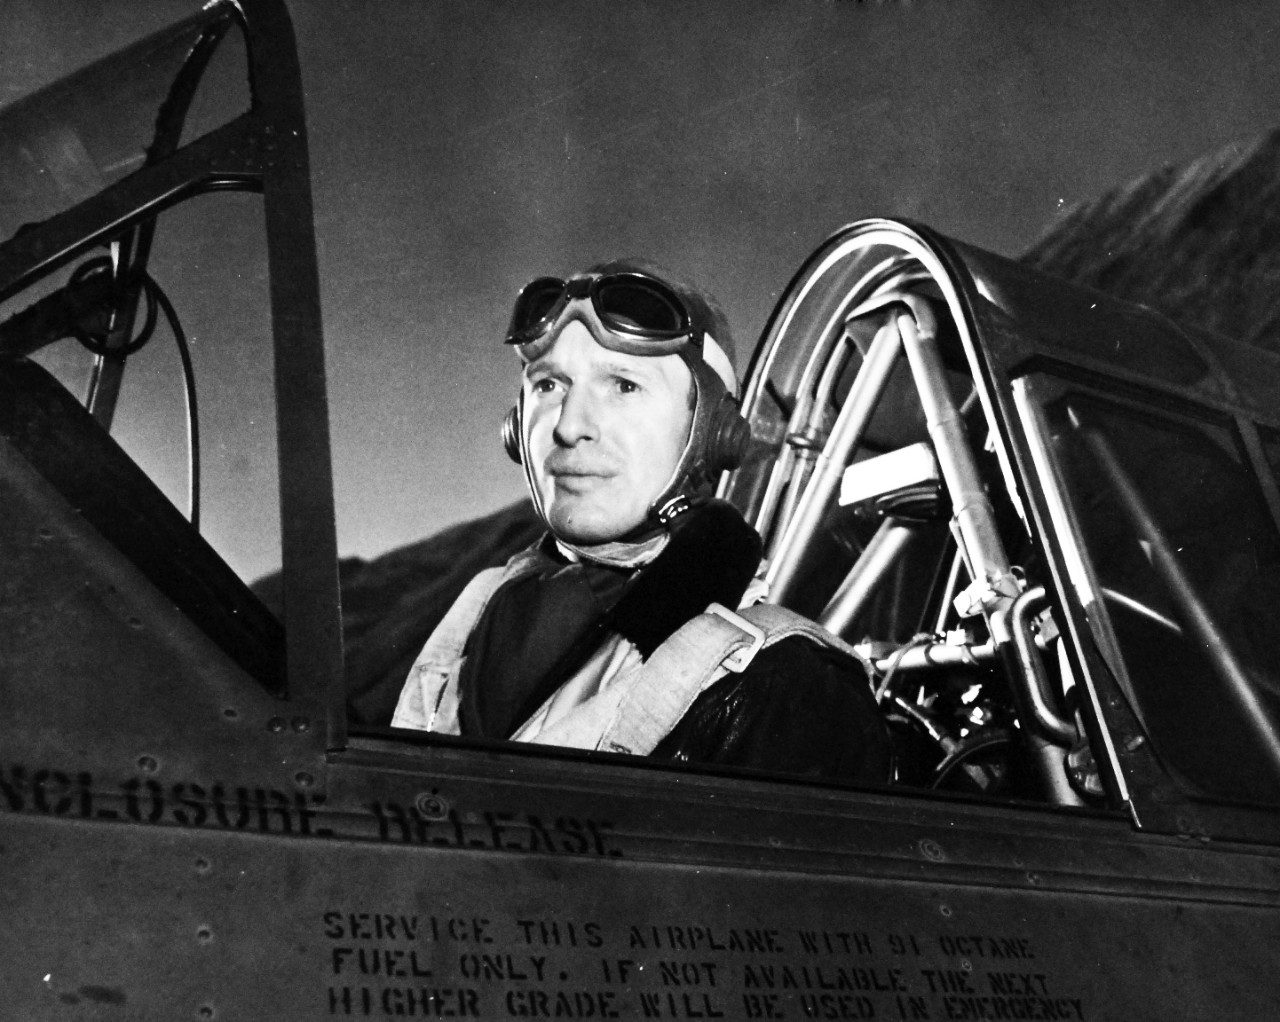 80-G-279776:   U.S. Naval Air Station, Kodiak, Alaska, 1943.     Commander George P. Rice, Chief Staff Officer in cockpit of an SNJ.  Photograph released November 15, 1943. U.S. Navy Photograph now in the collections of the National Archives.  (2016/01/19).